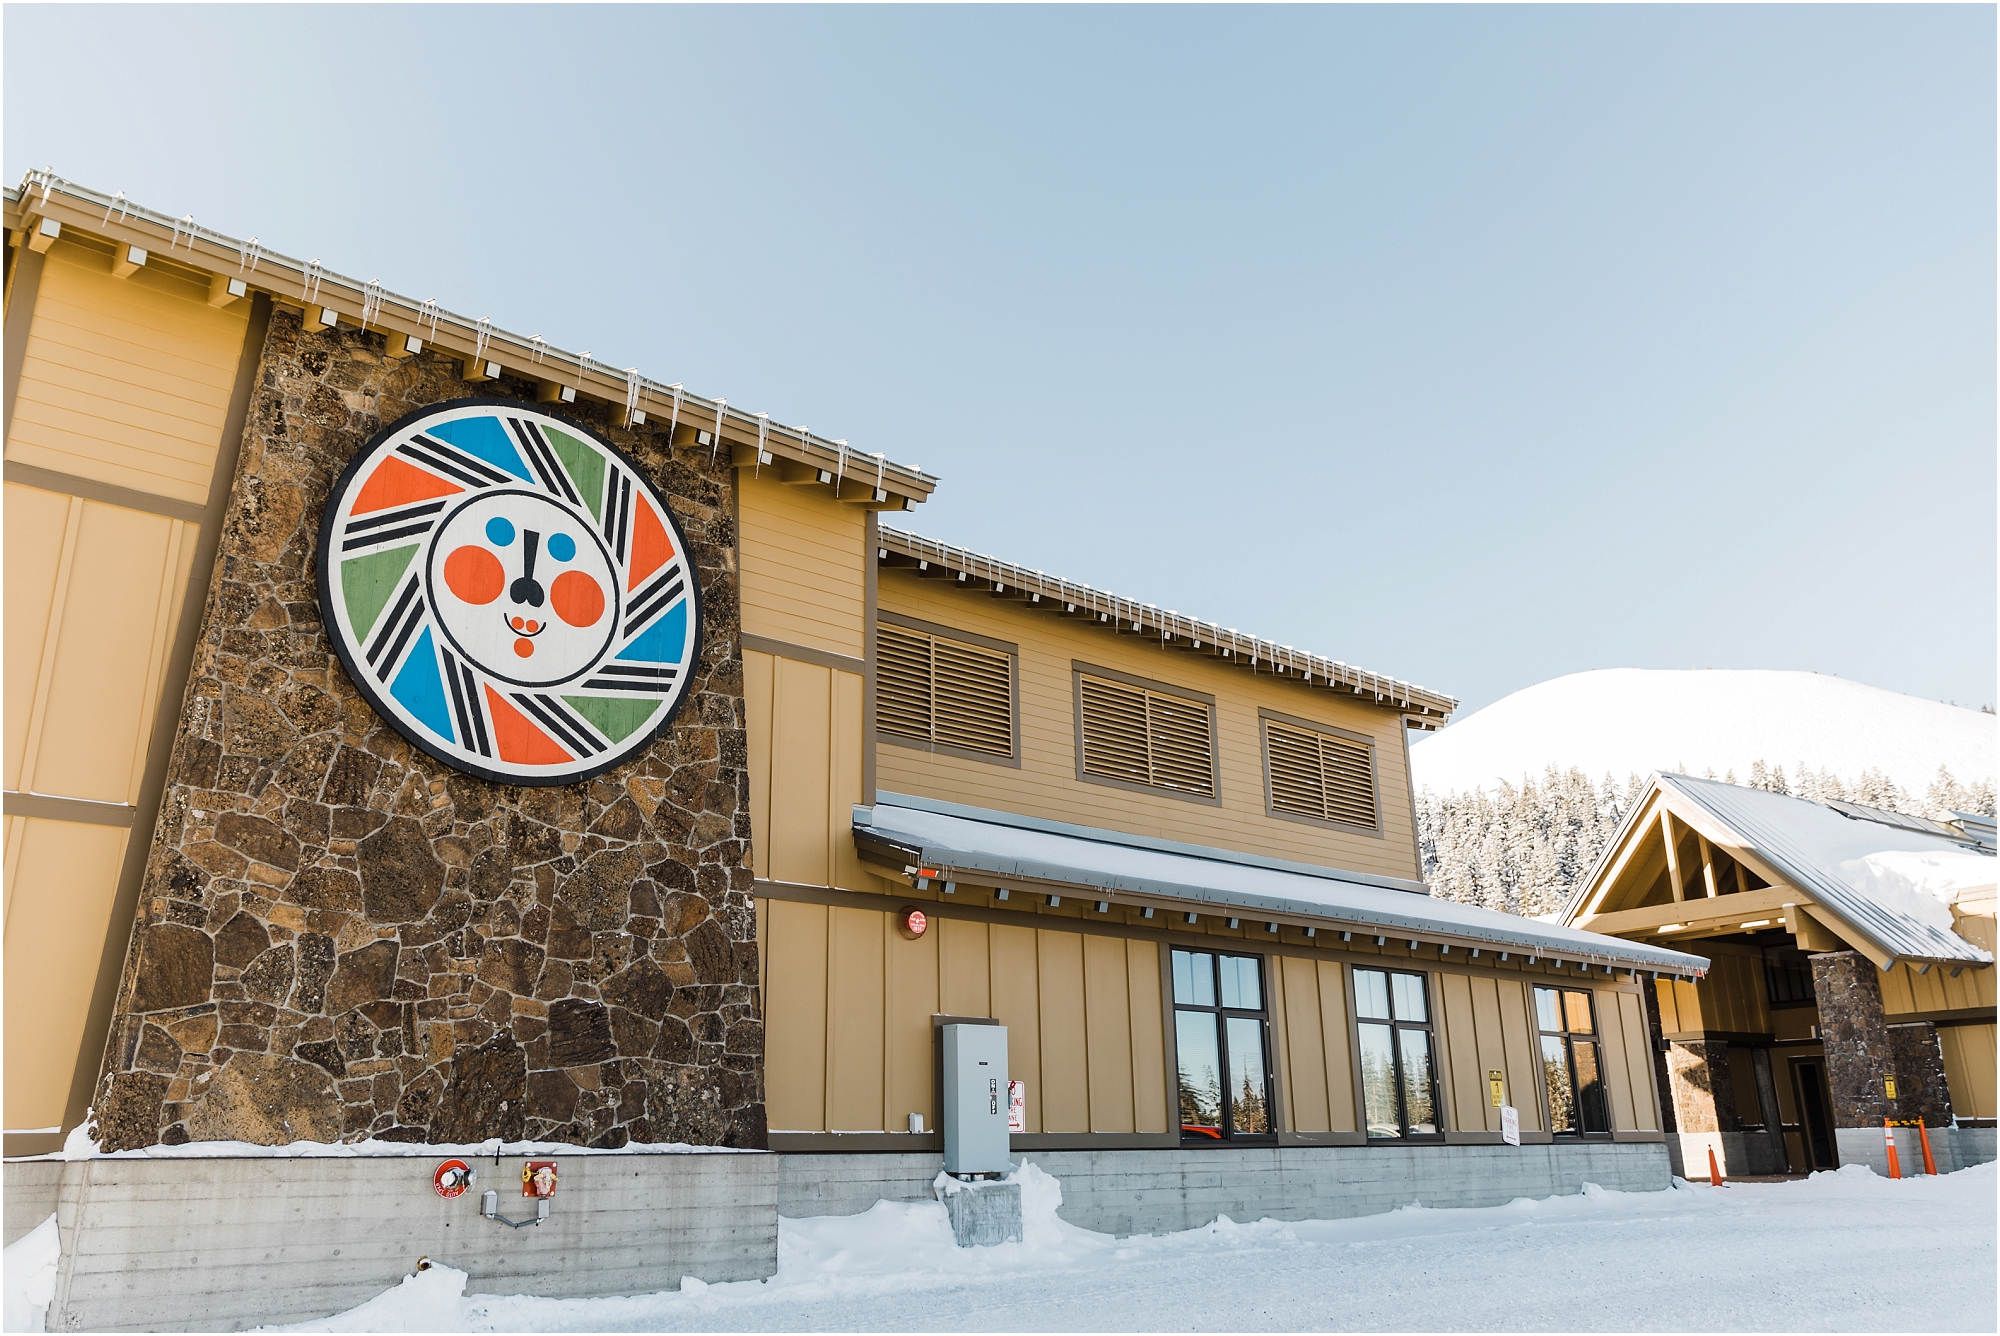 A two story building with the Mt Bachelor logo greets guests in the snow covered parking lot as the snow covered cinder butte known as the cone stands tall in the background of Mt Bachelor Ski Resort in Bend, Oregon. | Erica Swantek Photography